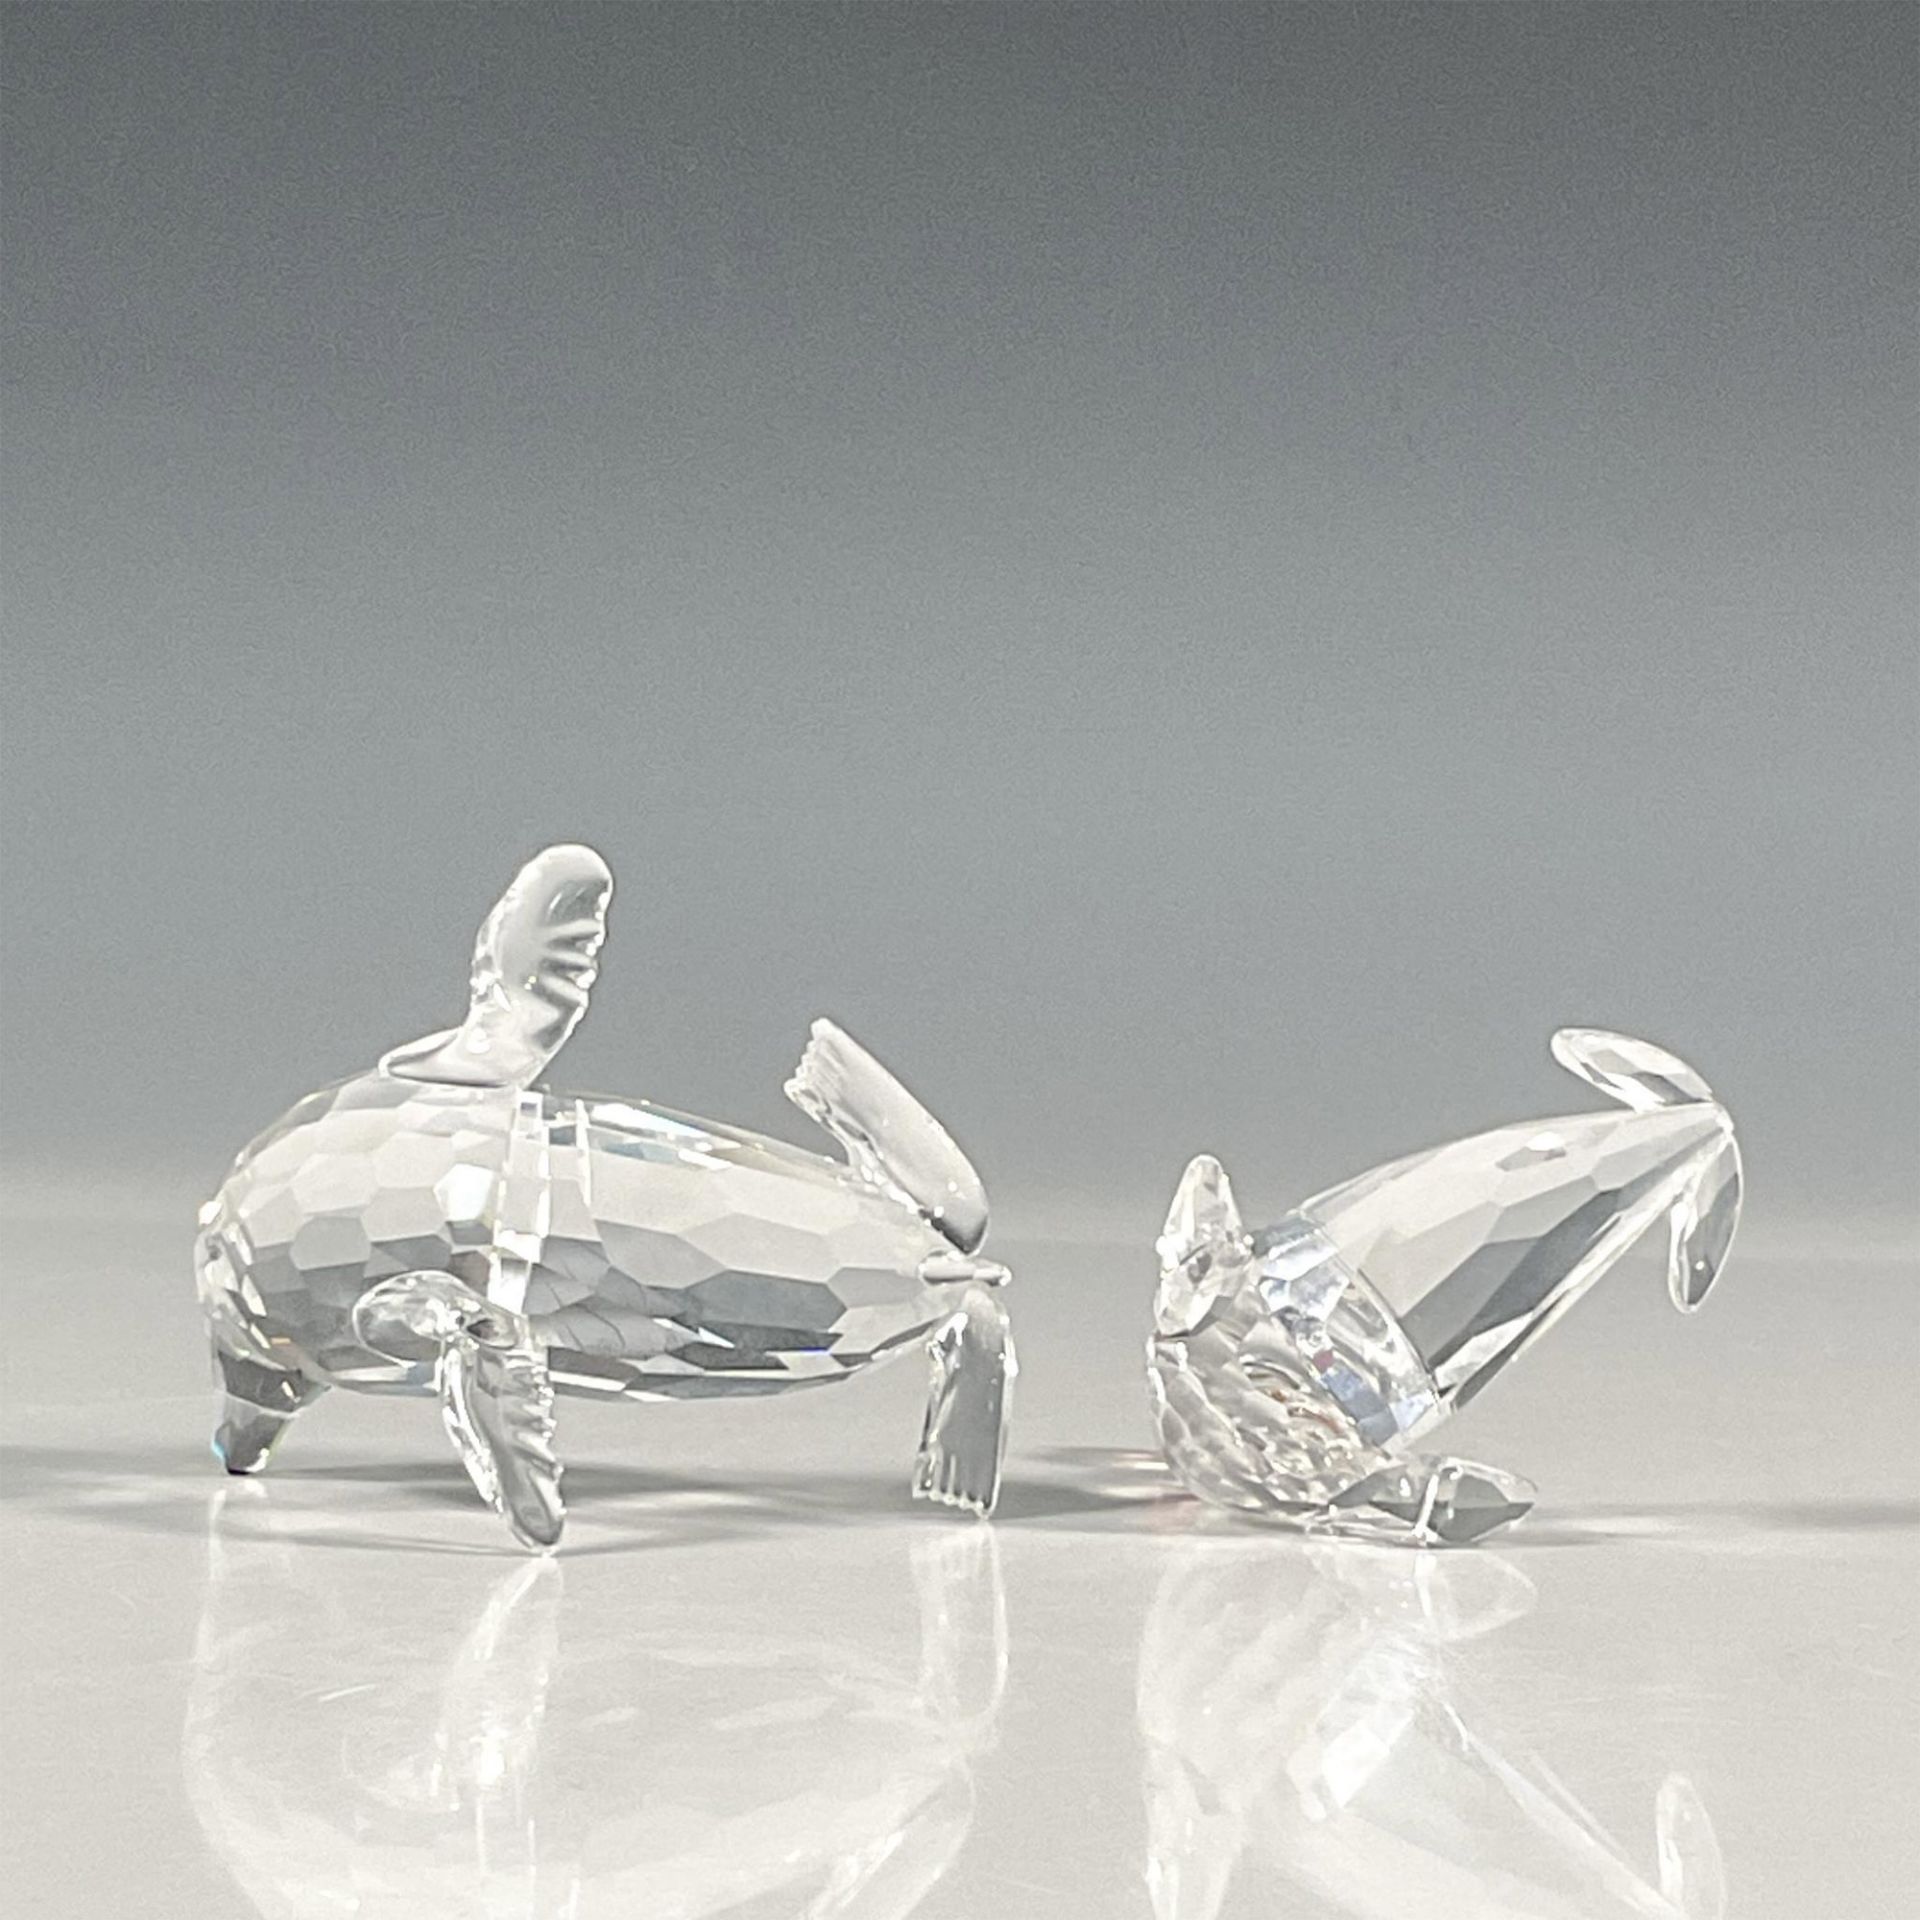 2pc Swarovski Silver Crystal Figurines, Seal and Sealion - Image 5 of 5